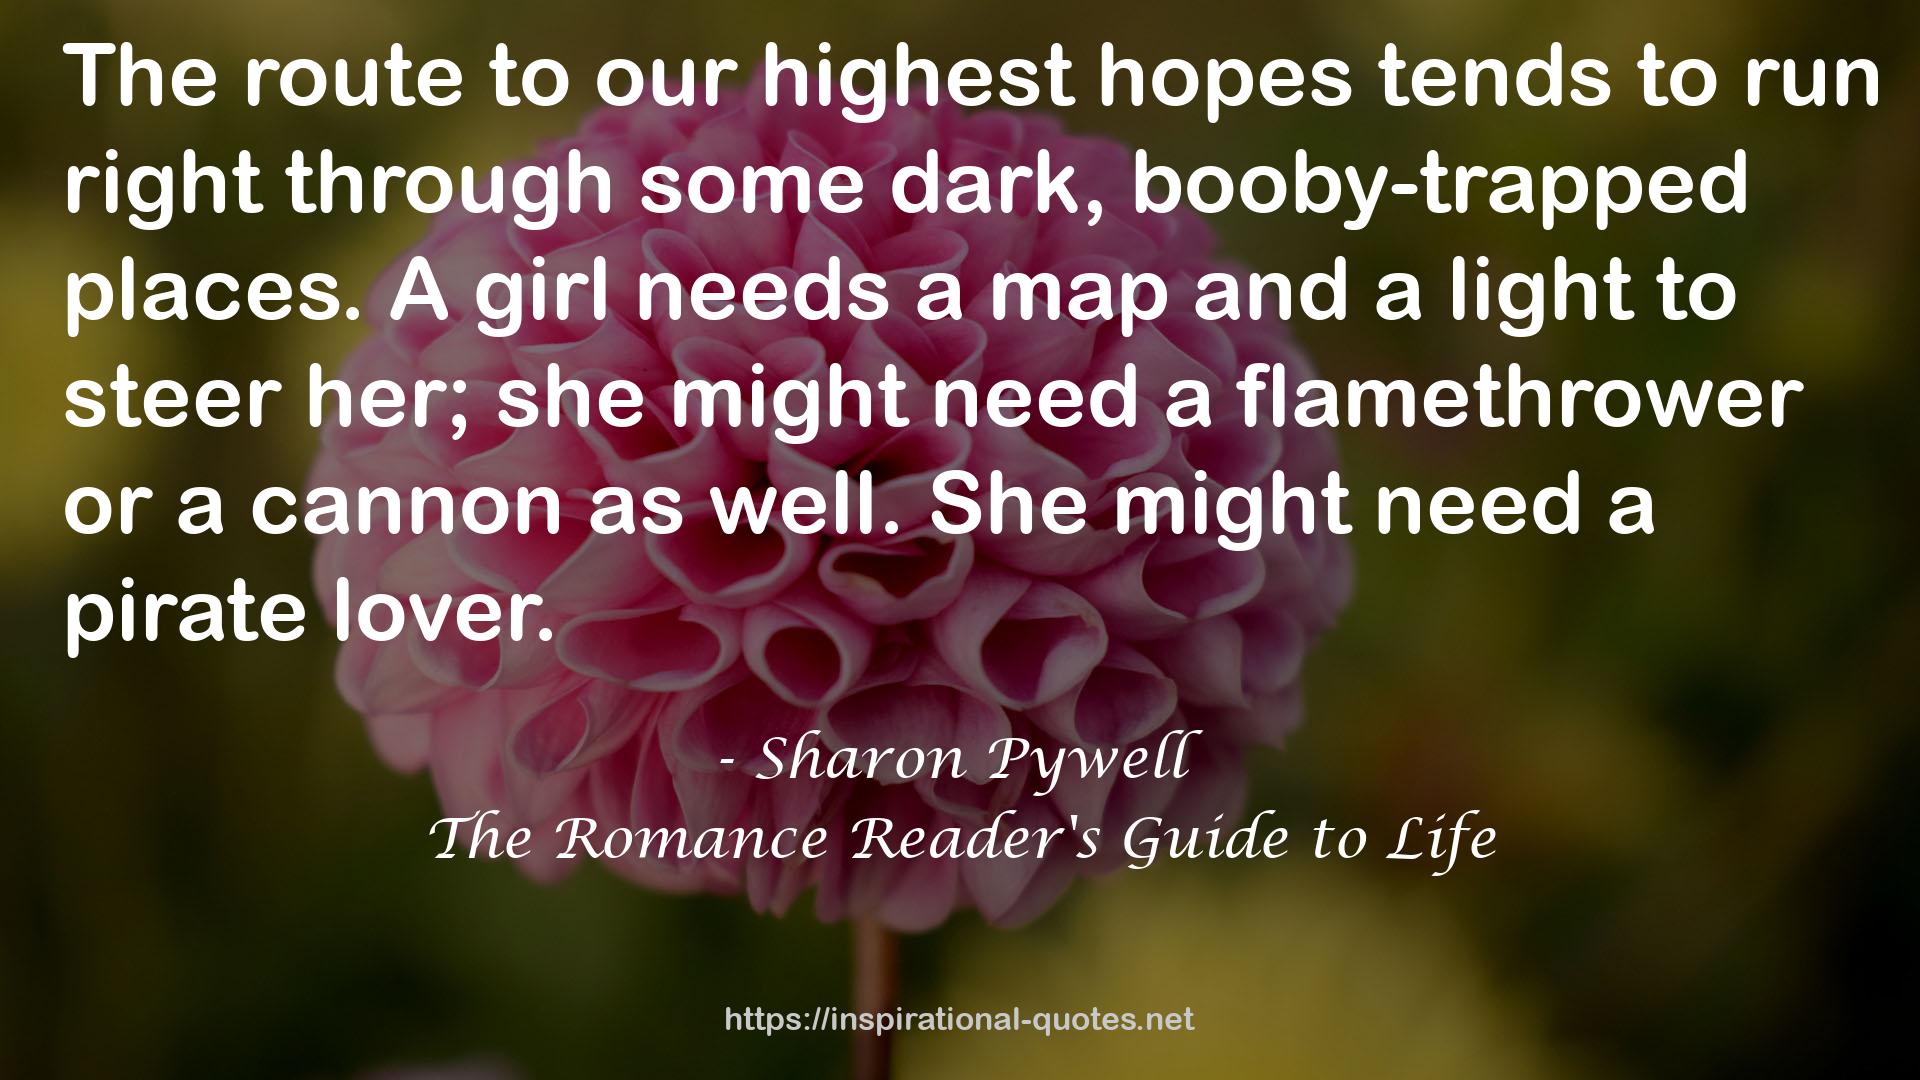 The Romance Reader's Guide to Life QUOTES